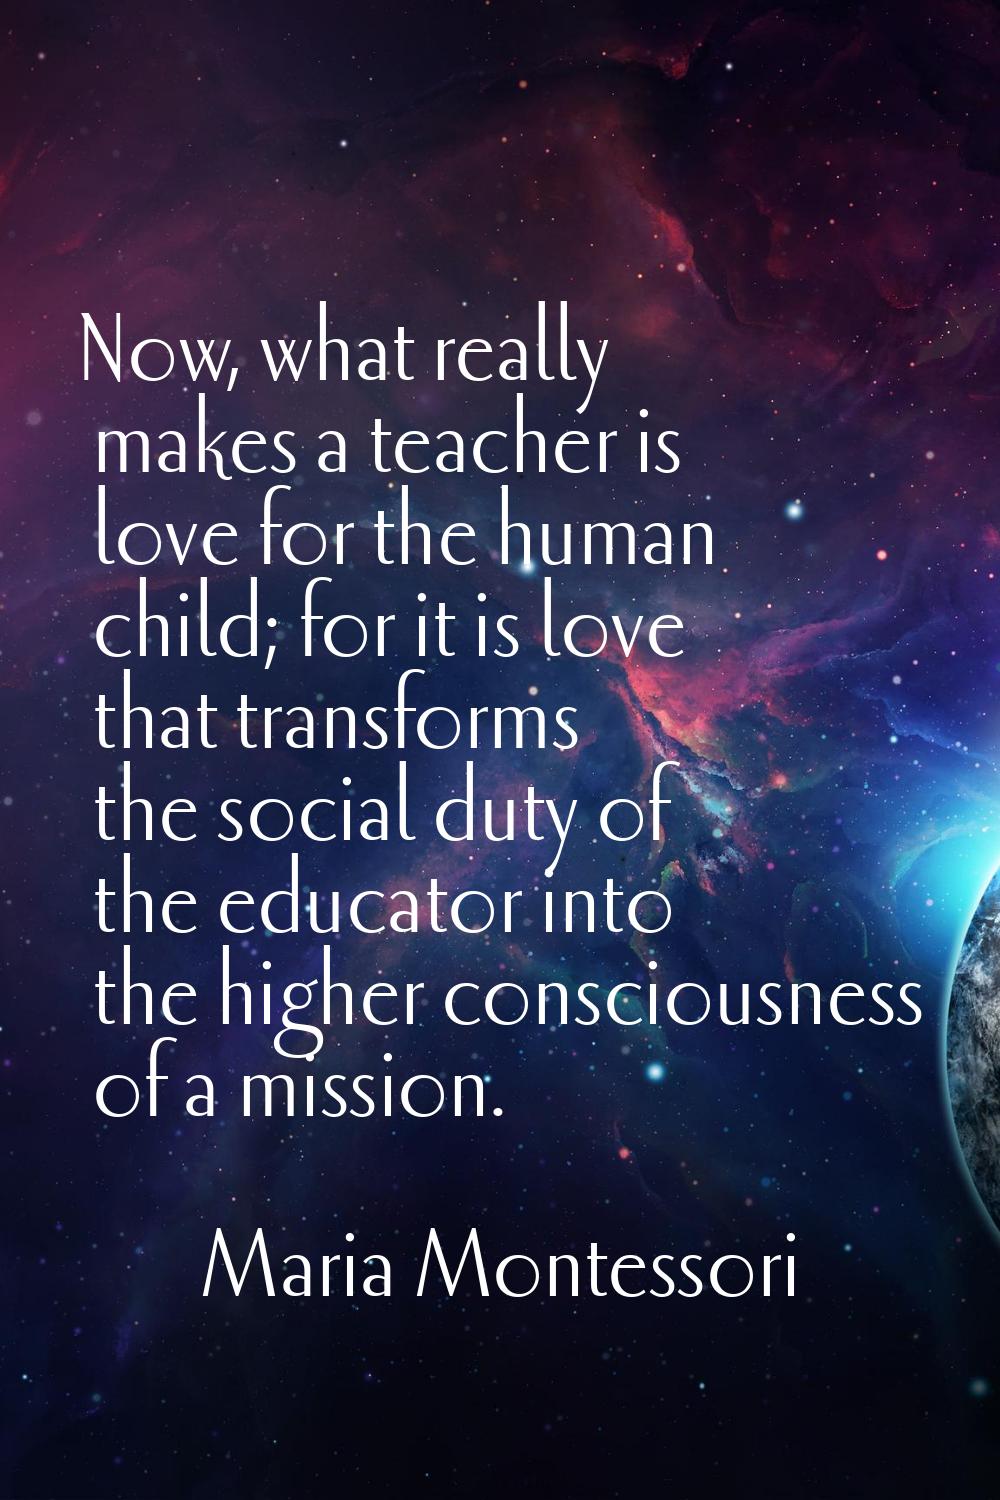 Now, what really makes a teacher is love for the human child; for it is love that transforms the so